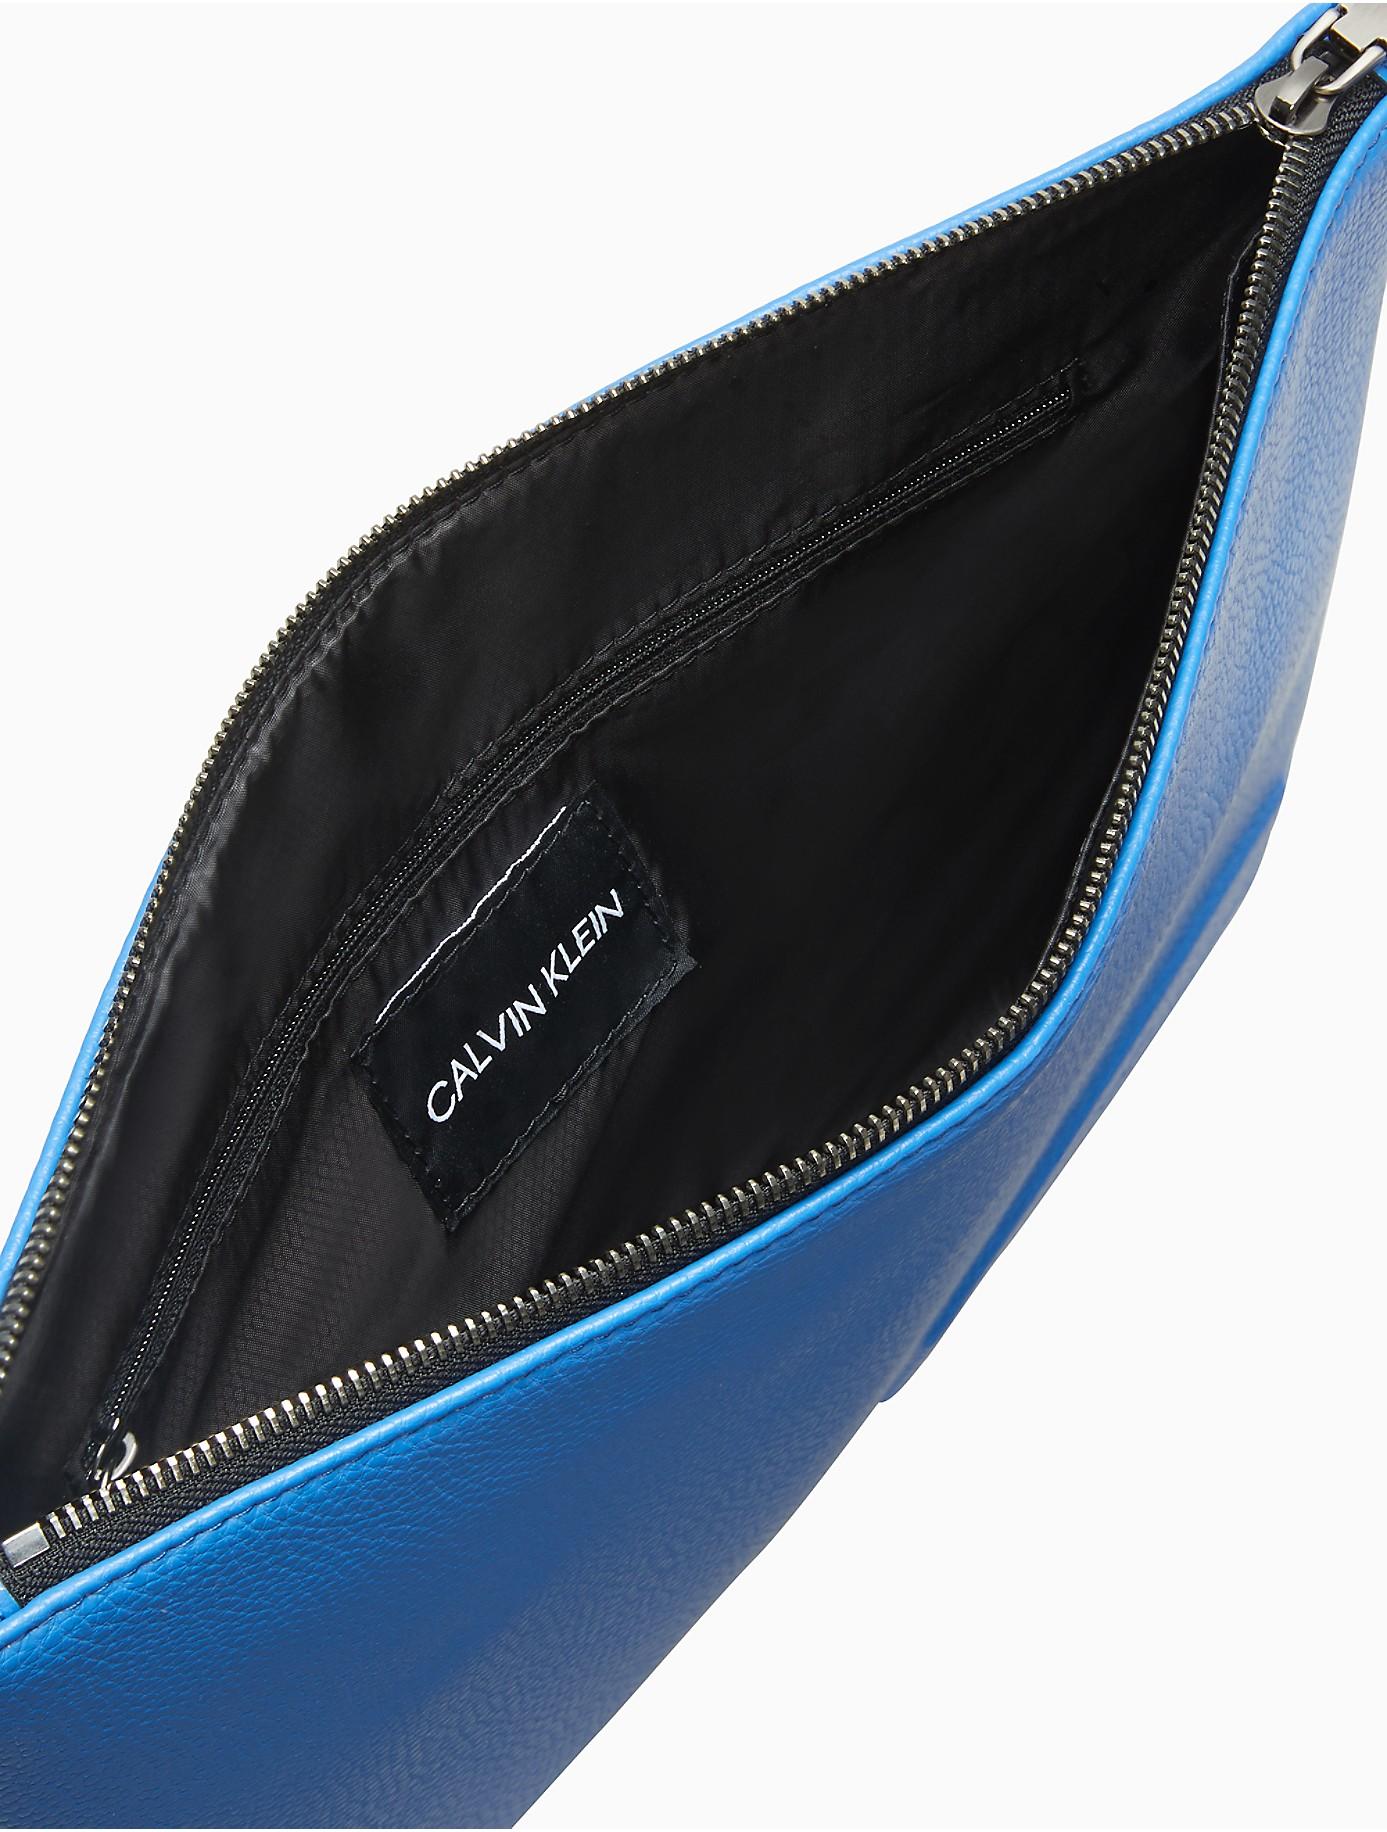 Calvin Klein Business Casual Pouch in Blue for Men - Lyst